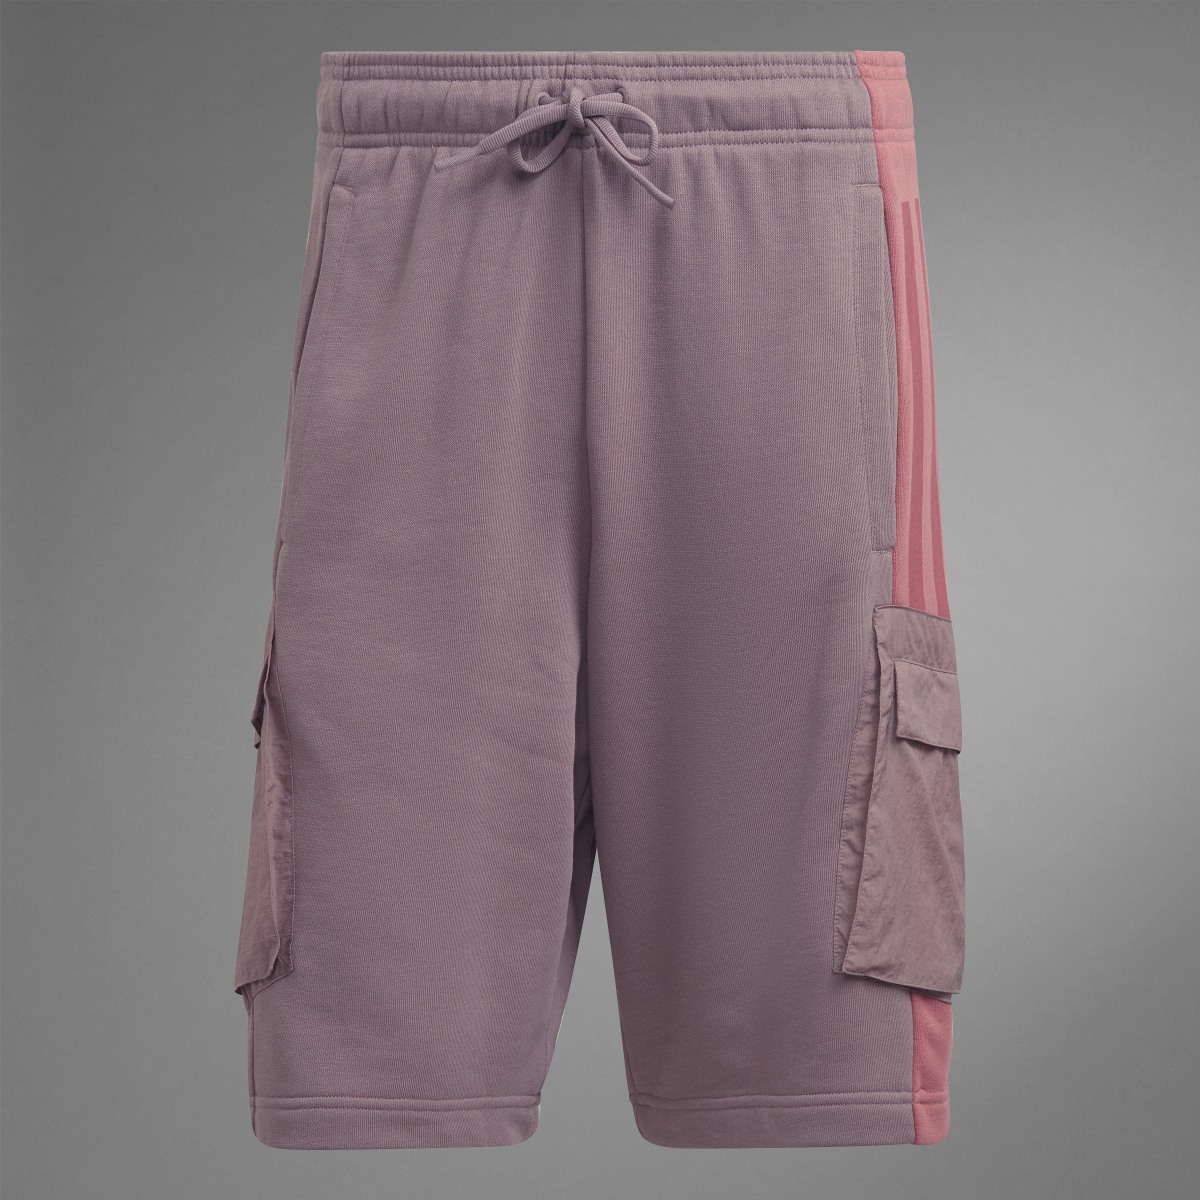 Adidas Colorblock French Terry Shorts. 10